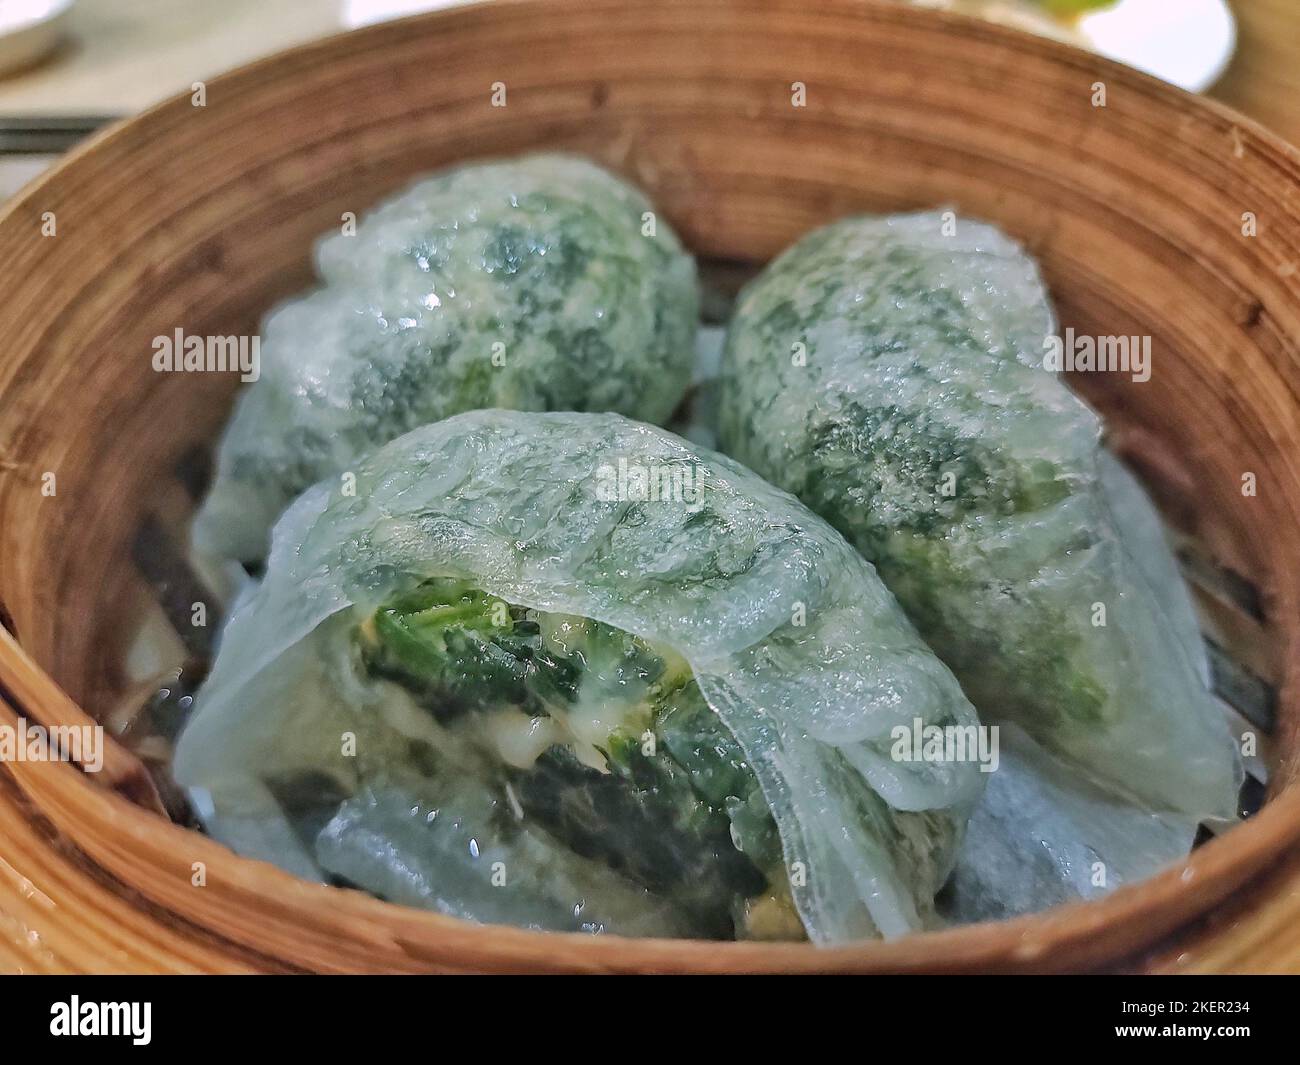 Steamed Chinese spinach with shrimp dumpling Stock Photo